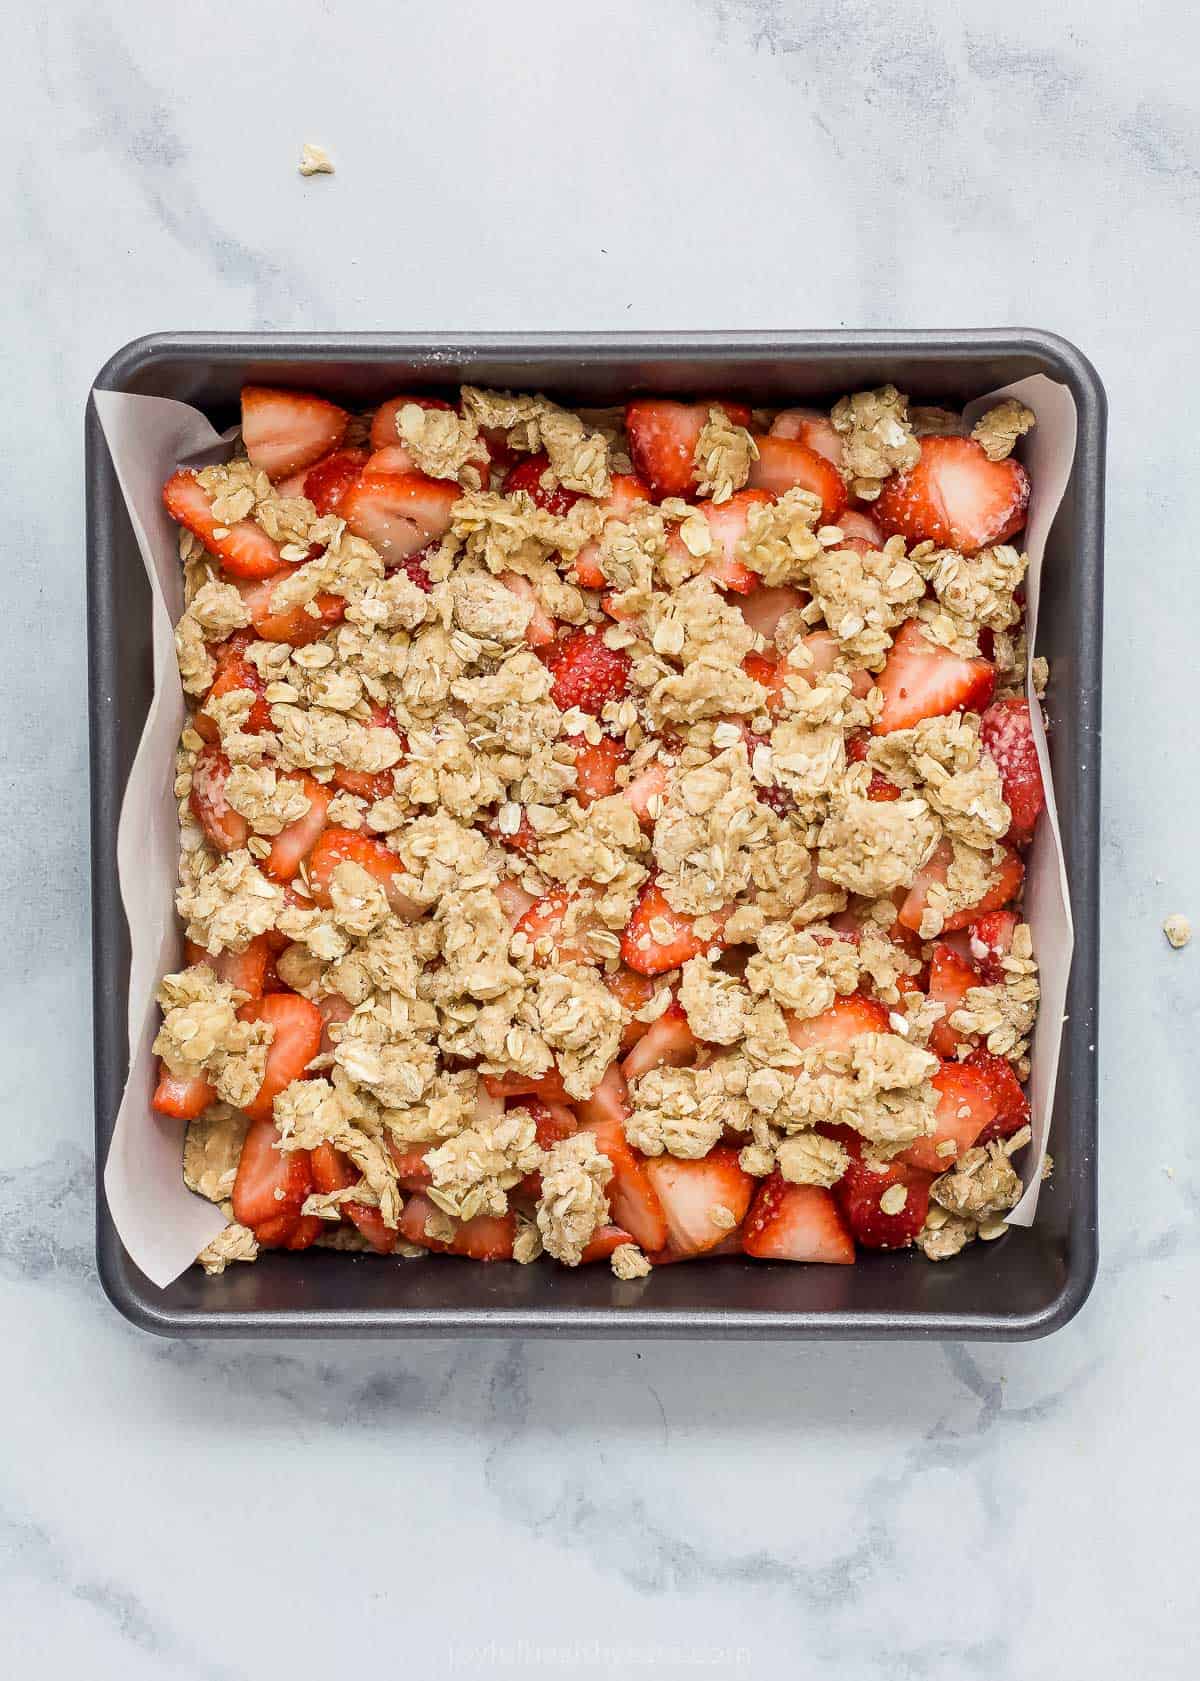 The crumble topping on top of the filling and crust in the prepared baking pan